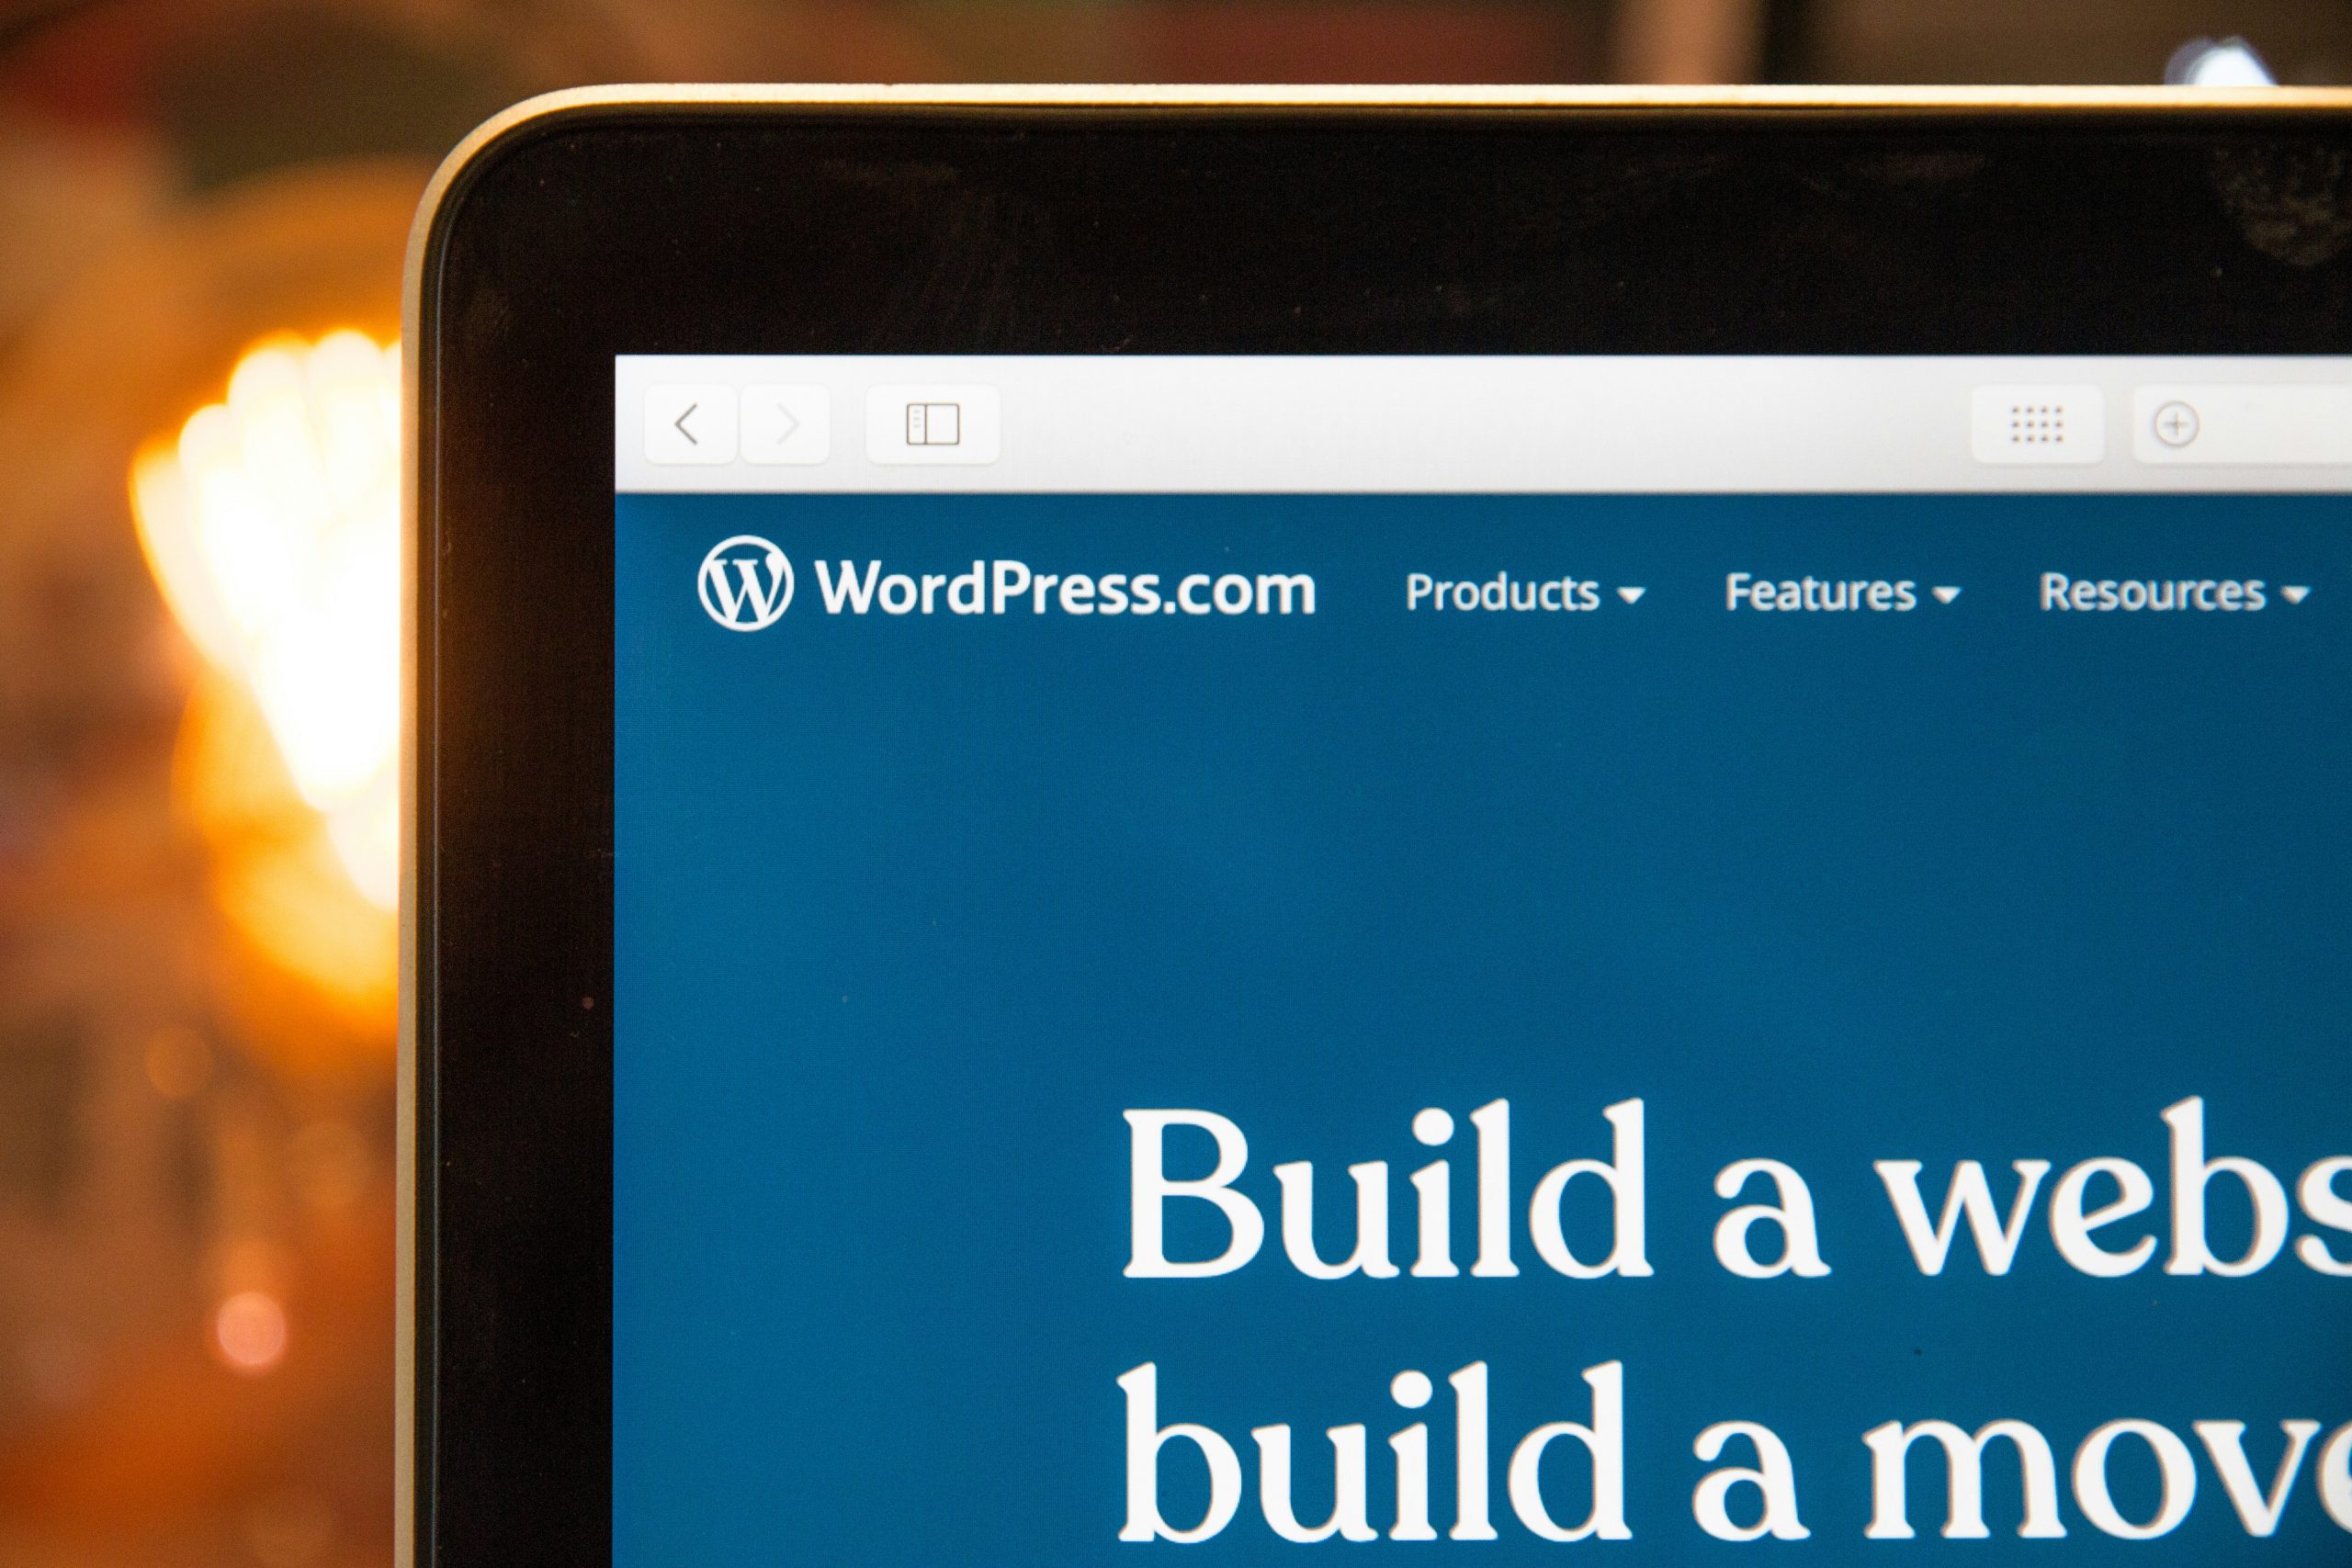 Seamlessly Integrate Facebook Pixel with Your WordPress Site